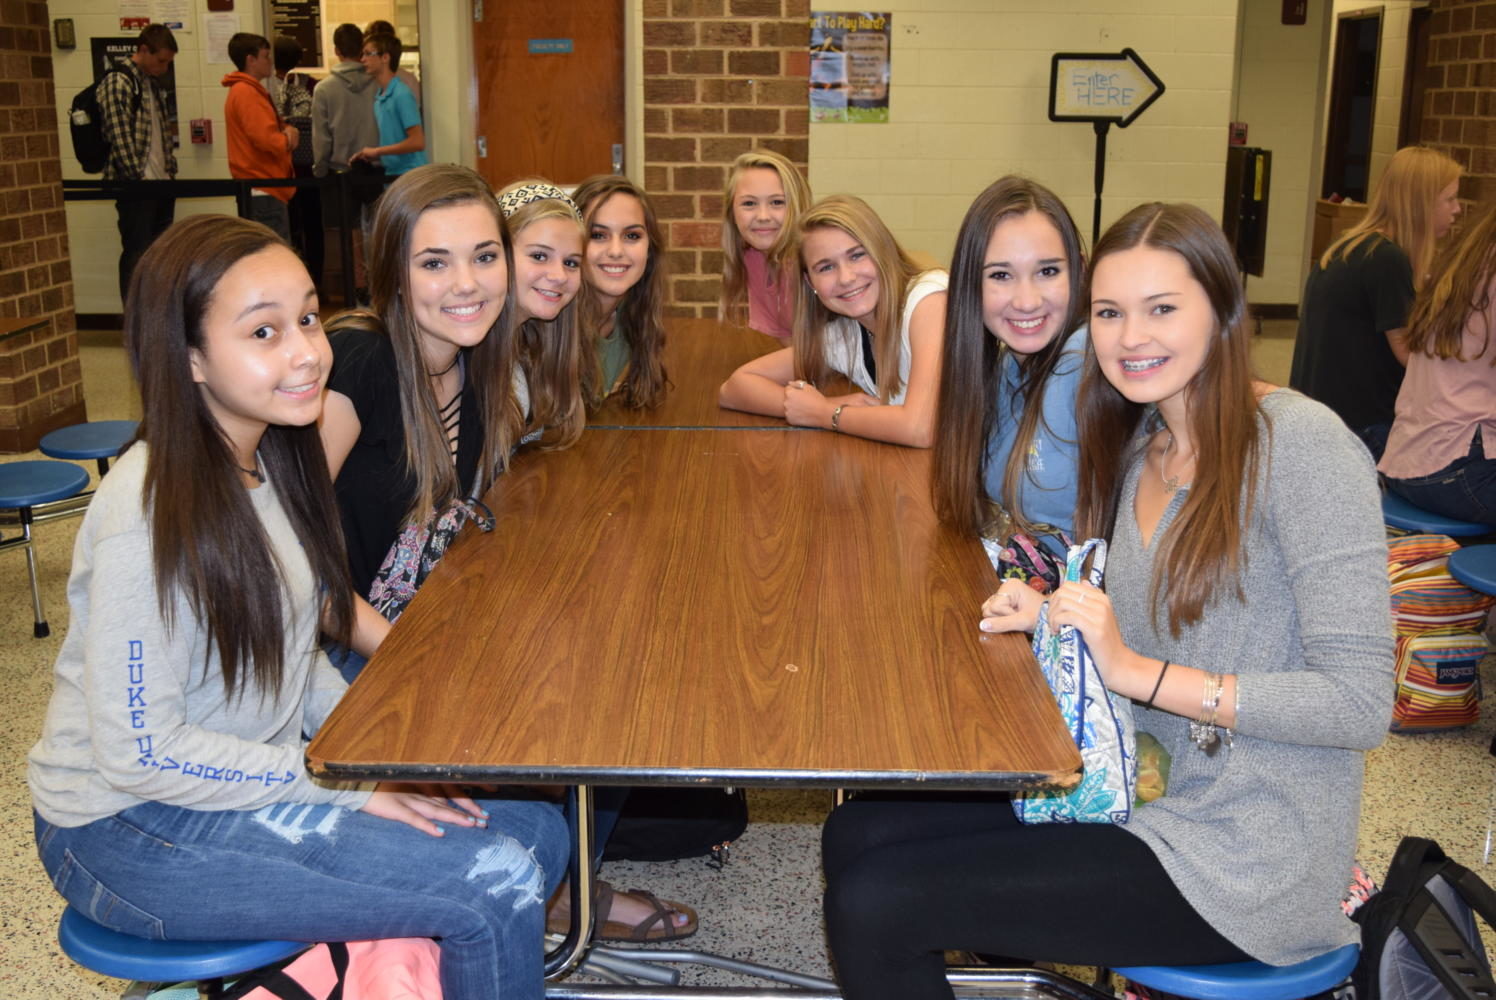 Midlo freshmen make the most out of lunch together.